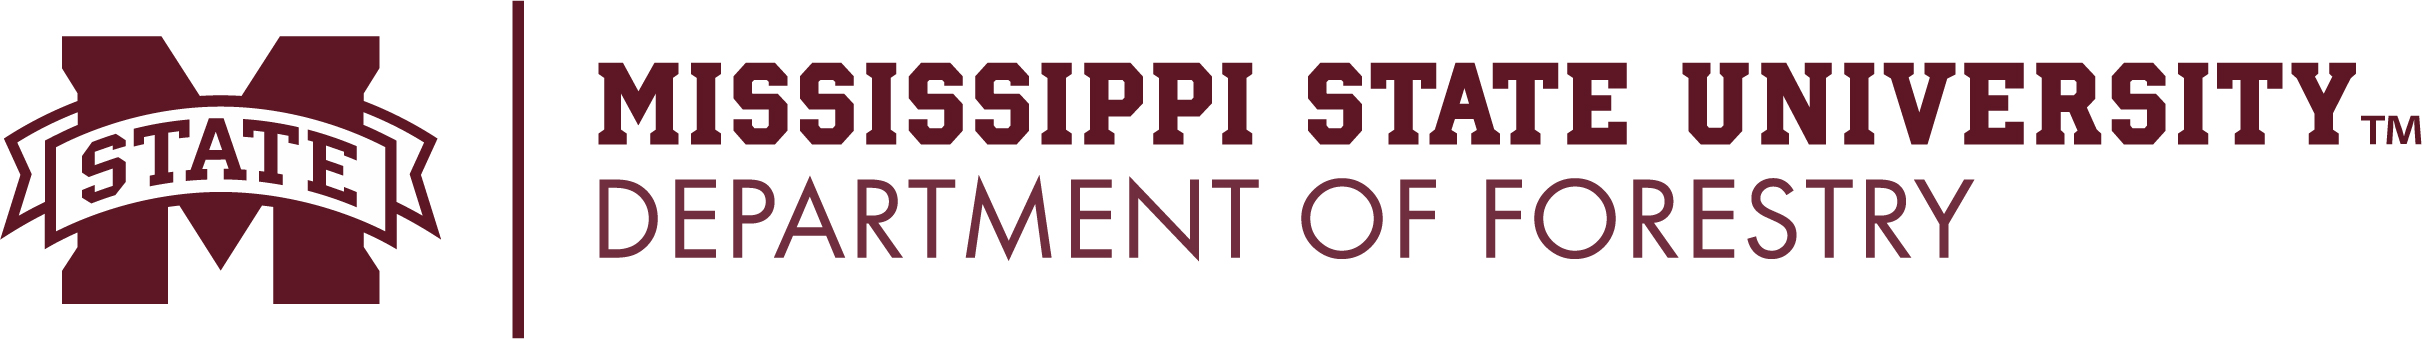 Mississippi State University Department of Forestry